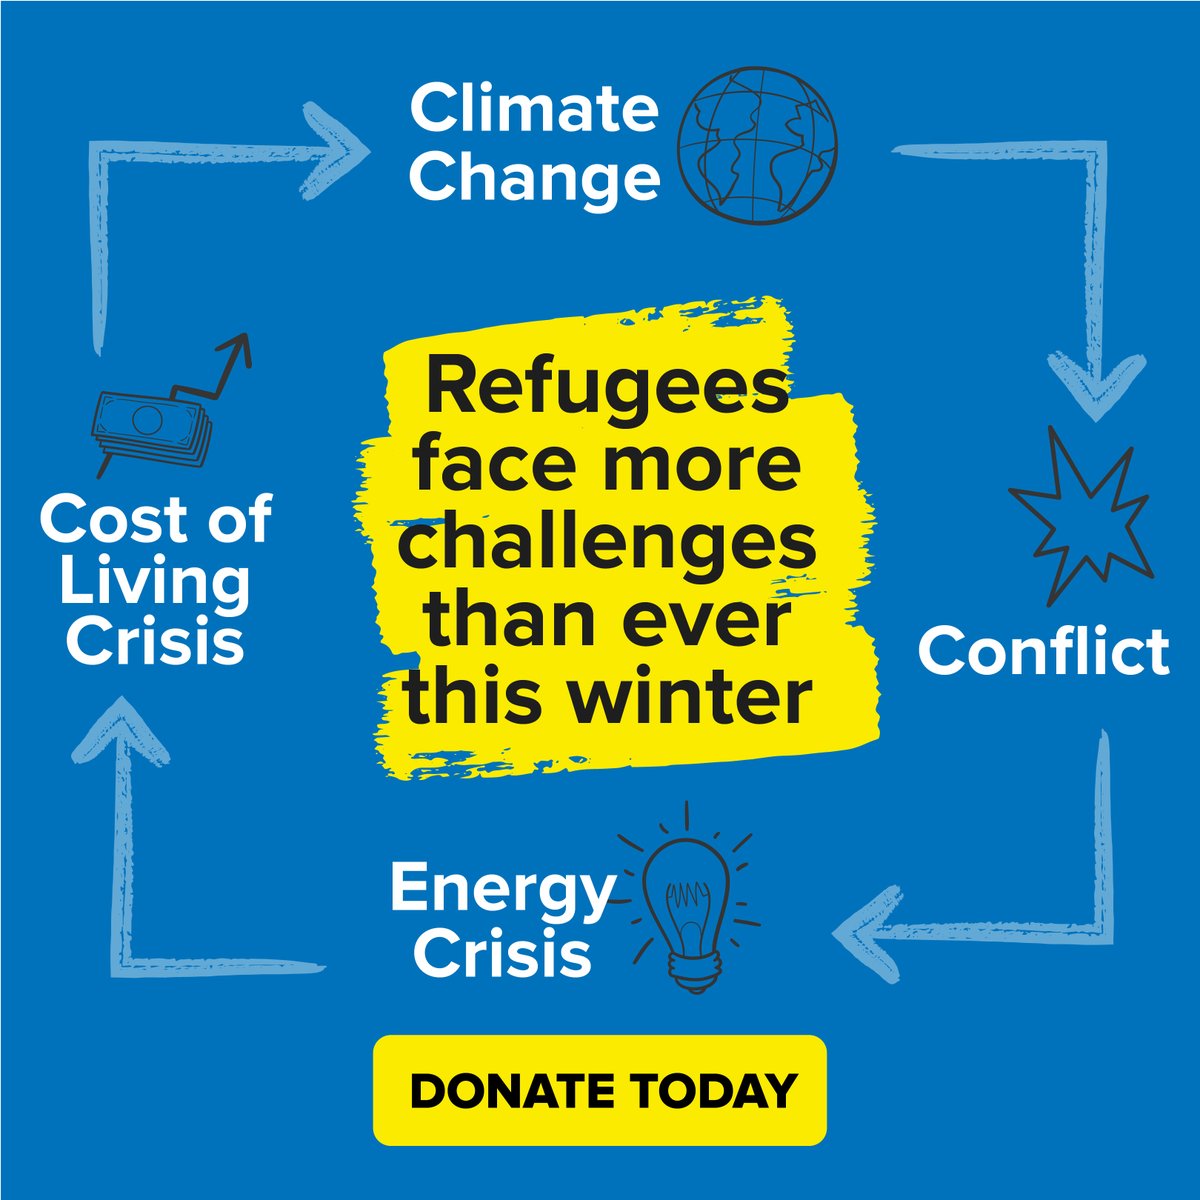 It’s all connected. And for refugees, these combined factors can turn the cold winter months into a struggle for survival. Donate today to protect people forced to flee: bit.ly/3MpQILY